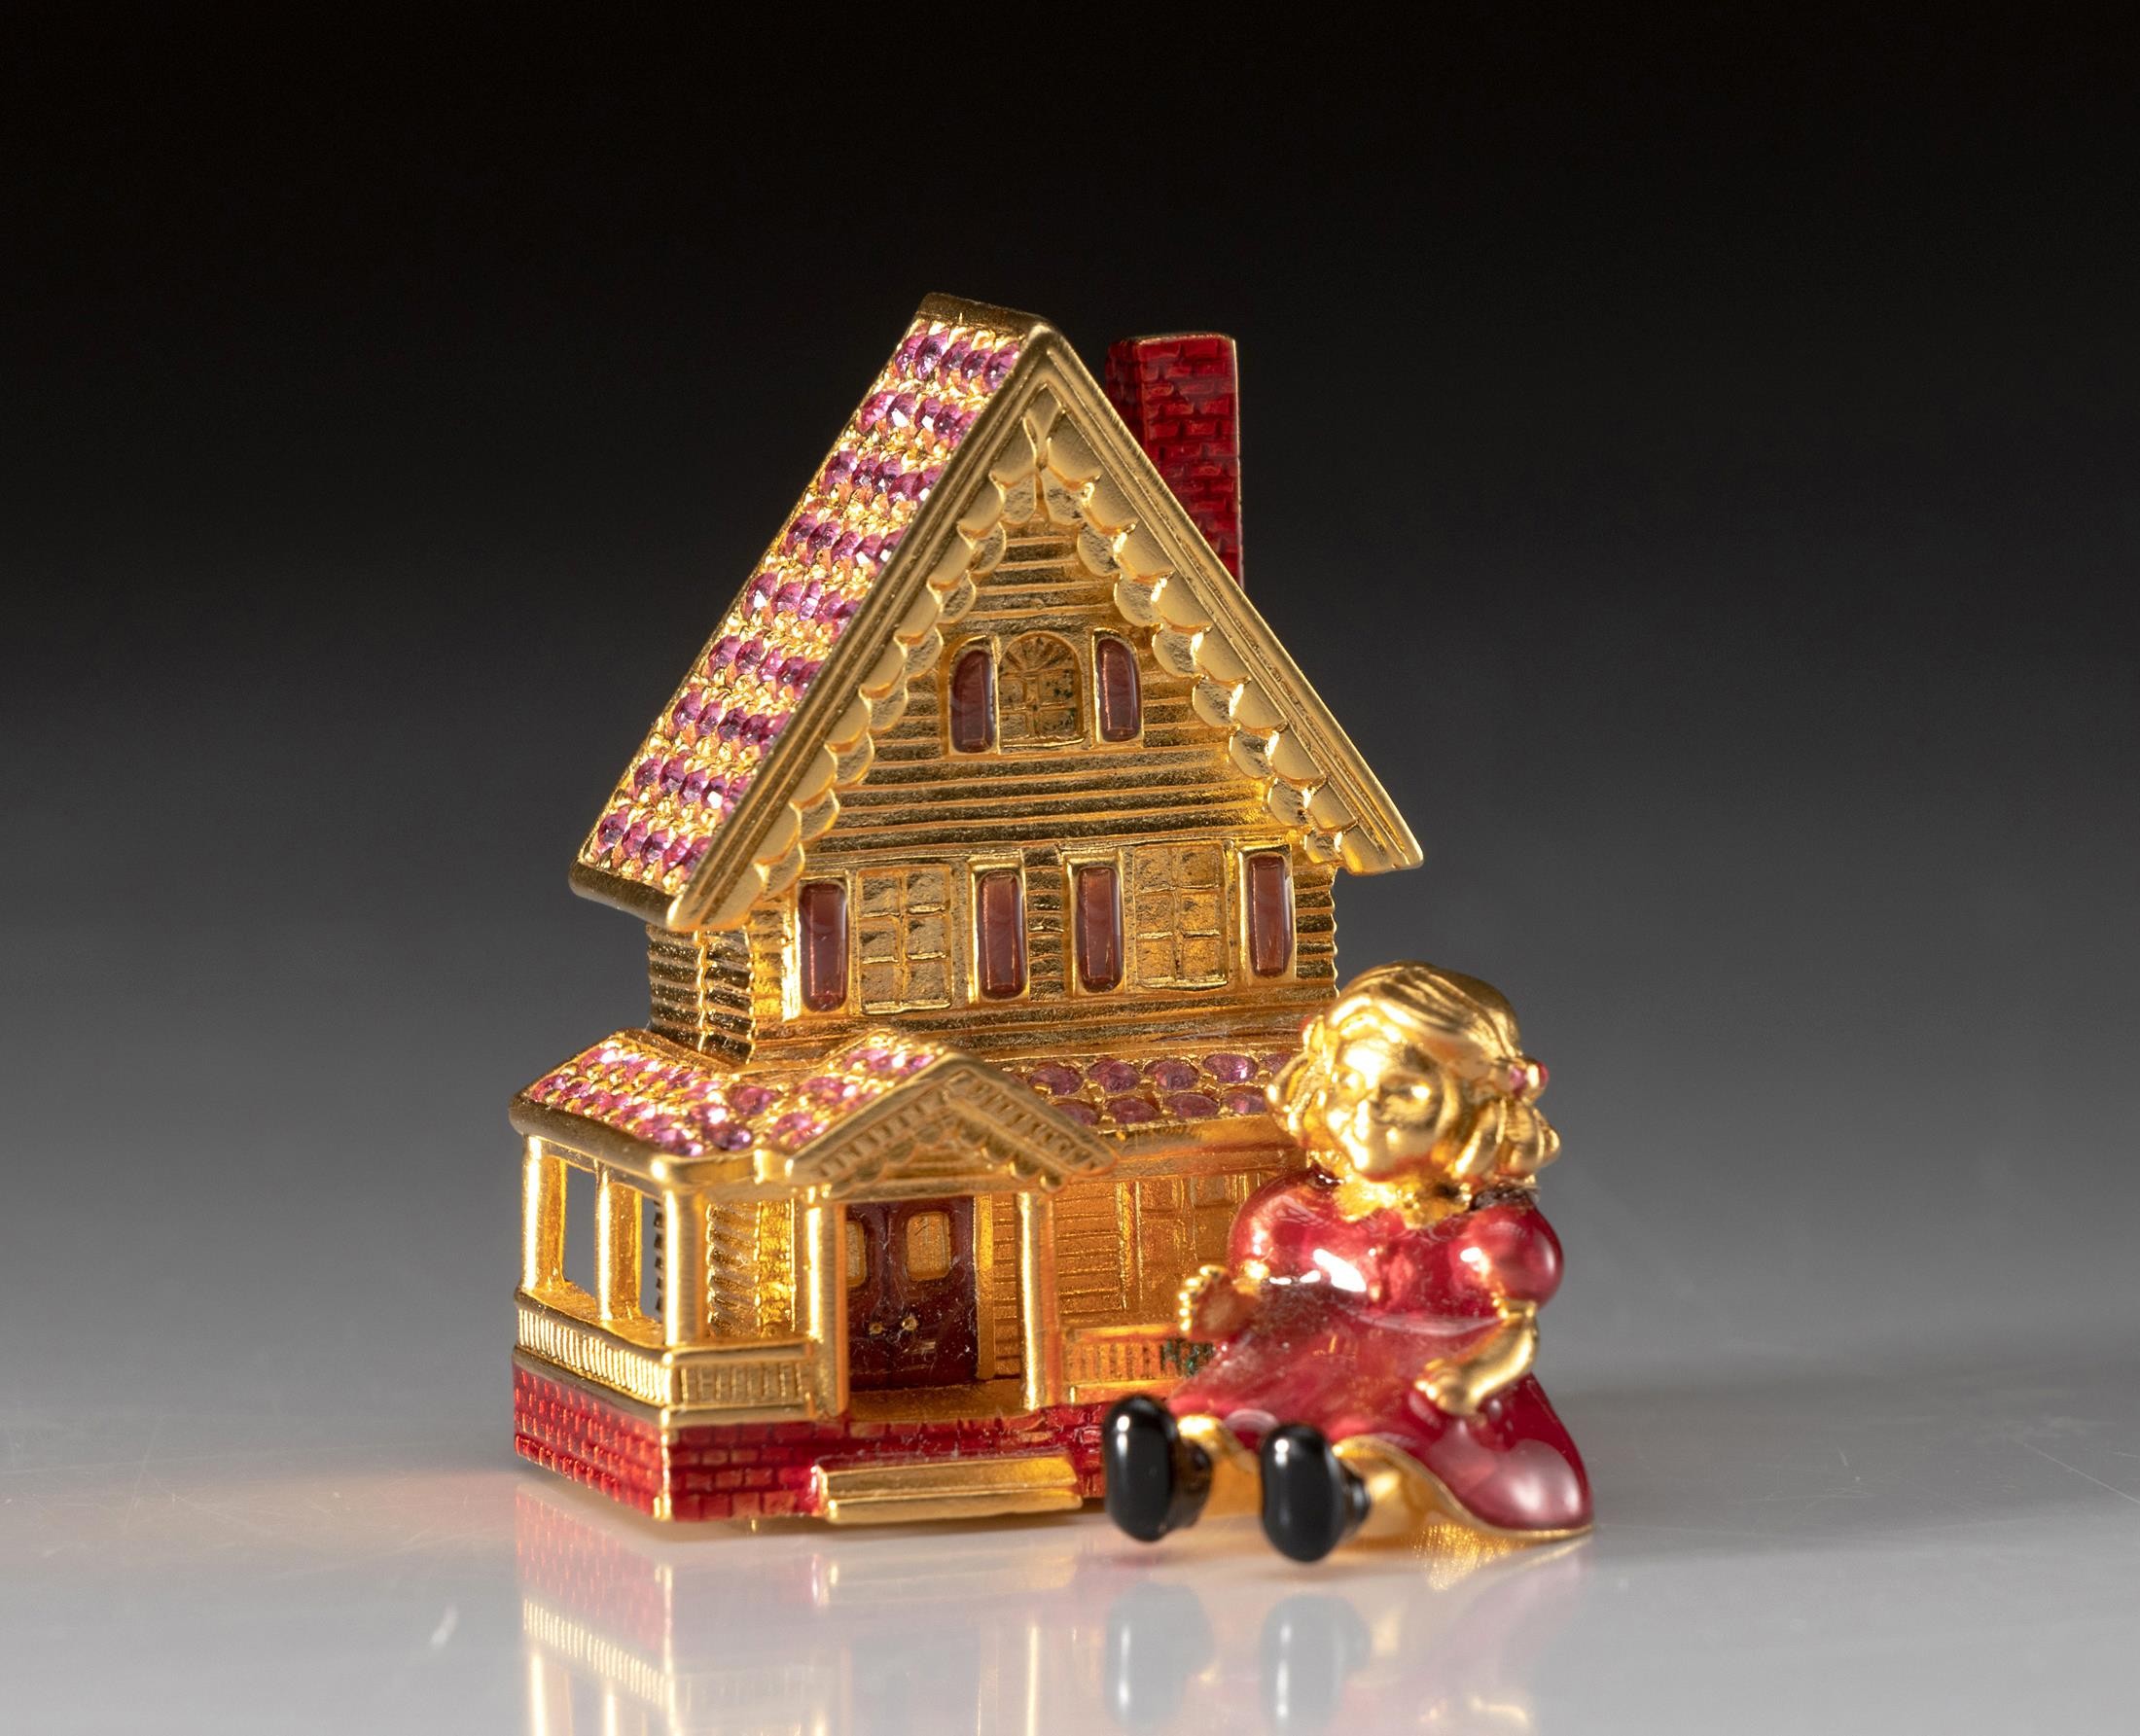 AN ESTEE LAUDER SOLID PERFUME COMPACT, VICTORIAN DOLL HOUSE, 2001